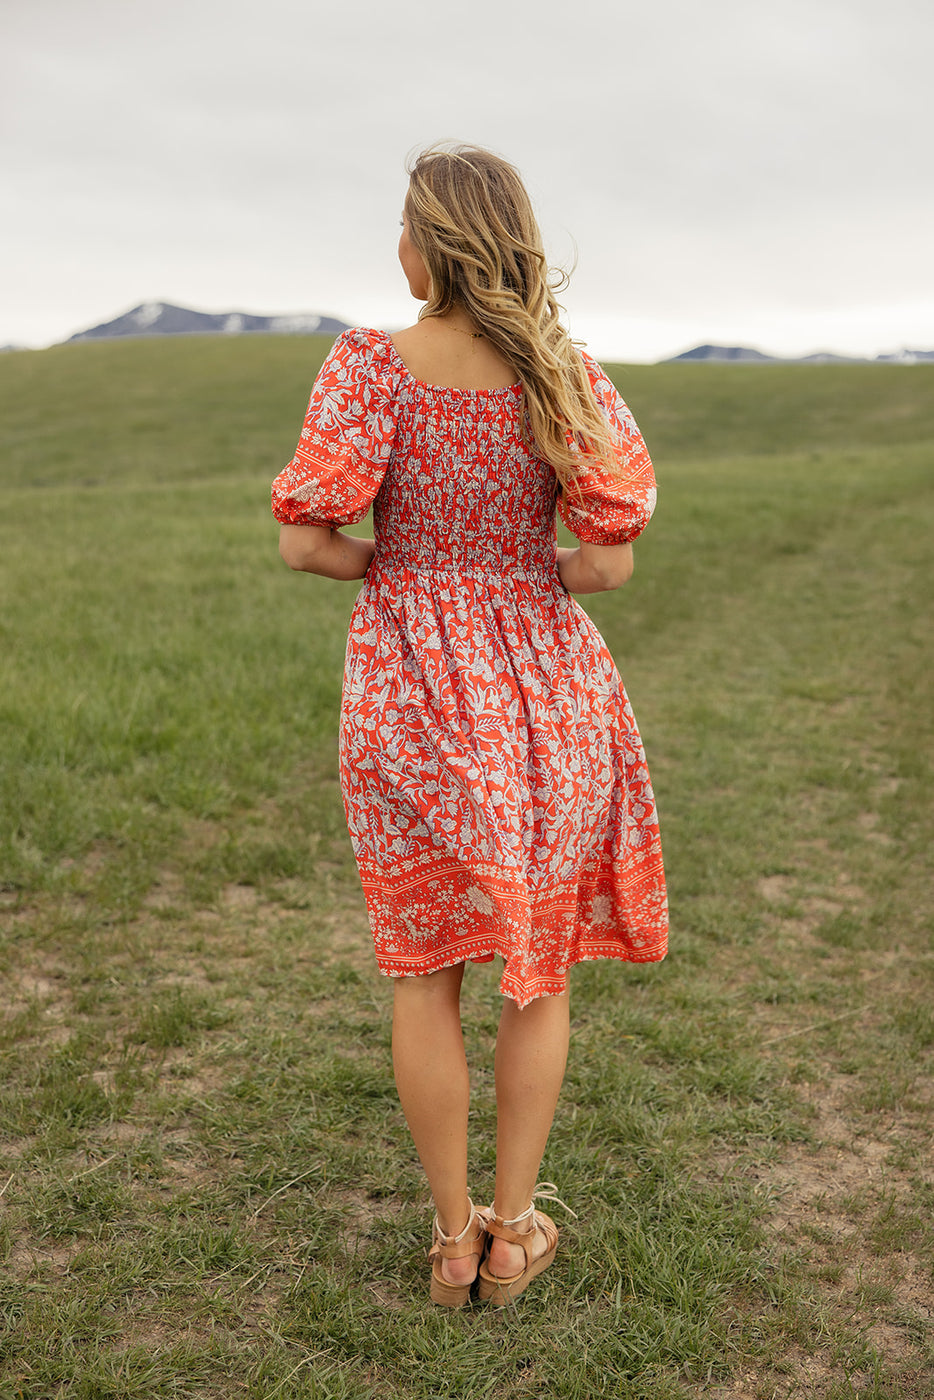 a woman in a red dress standing in a field